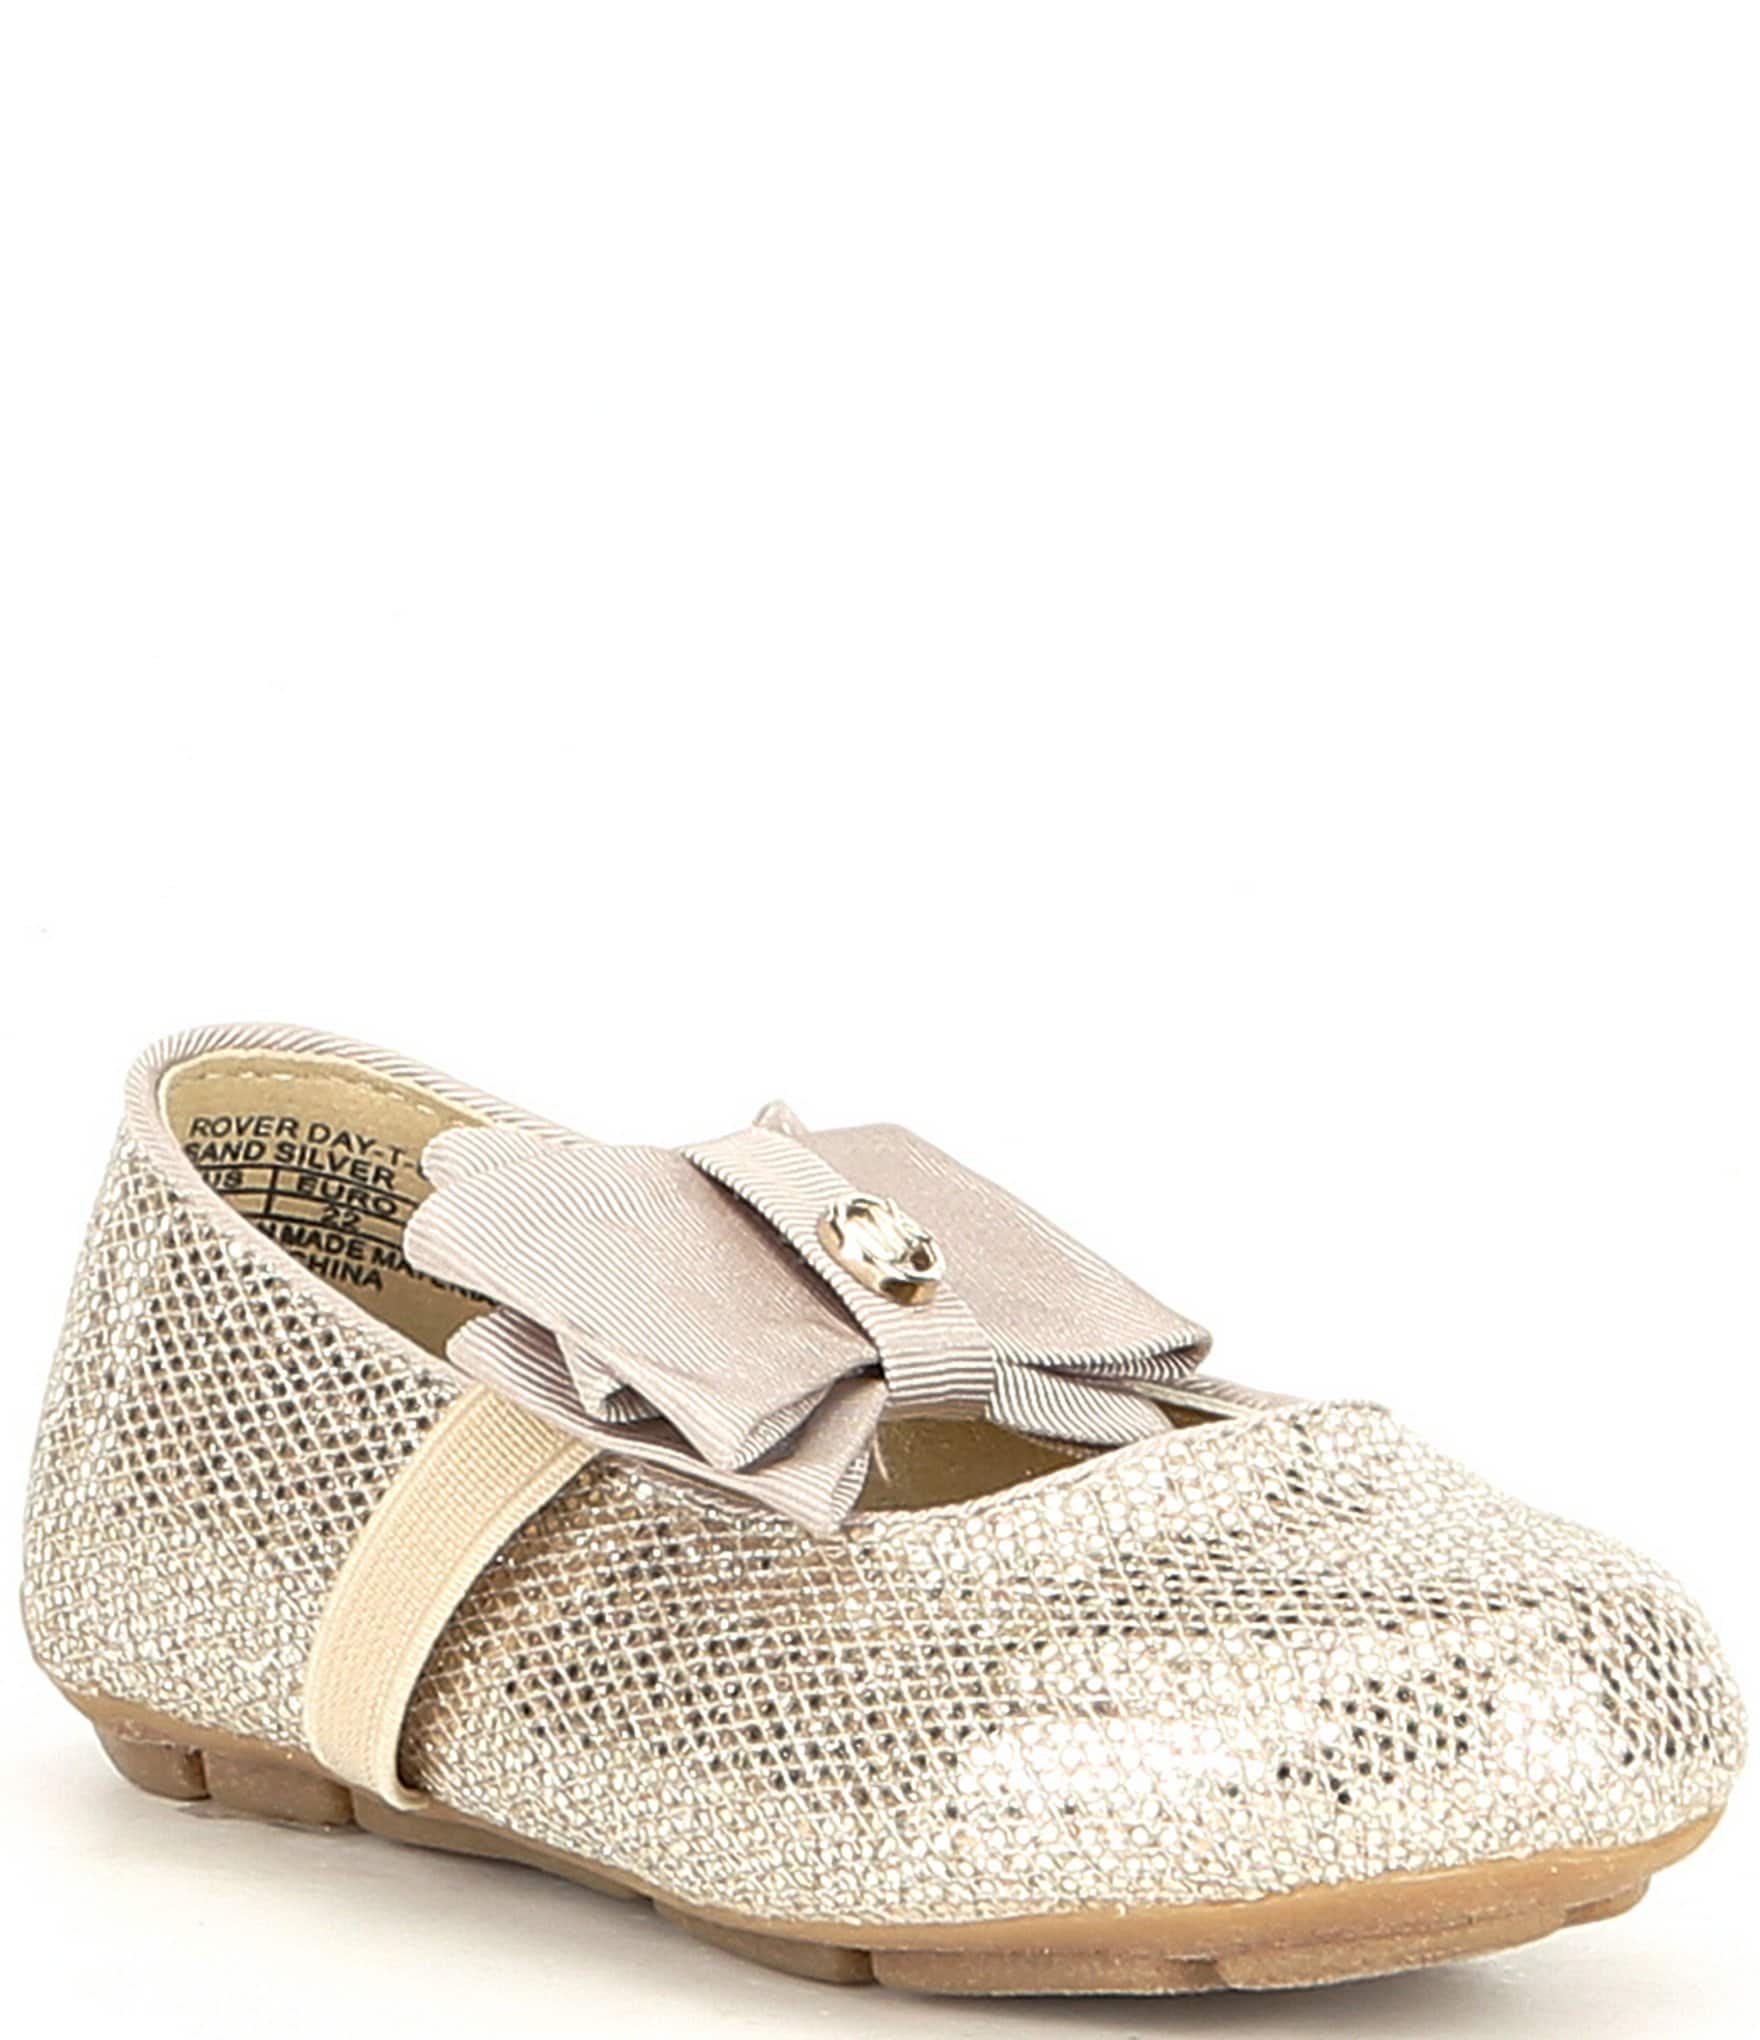 silver flats for toddlers